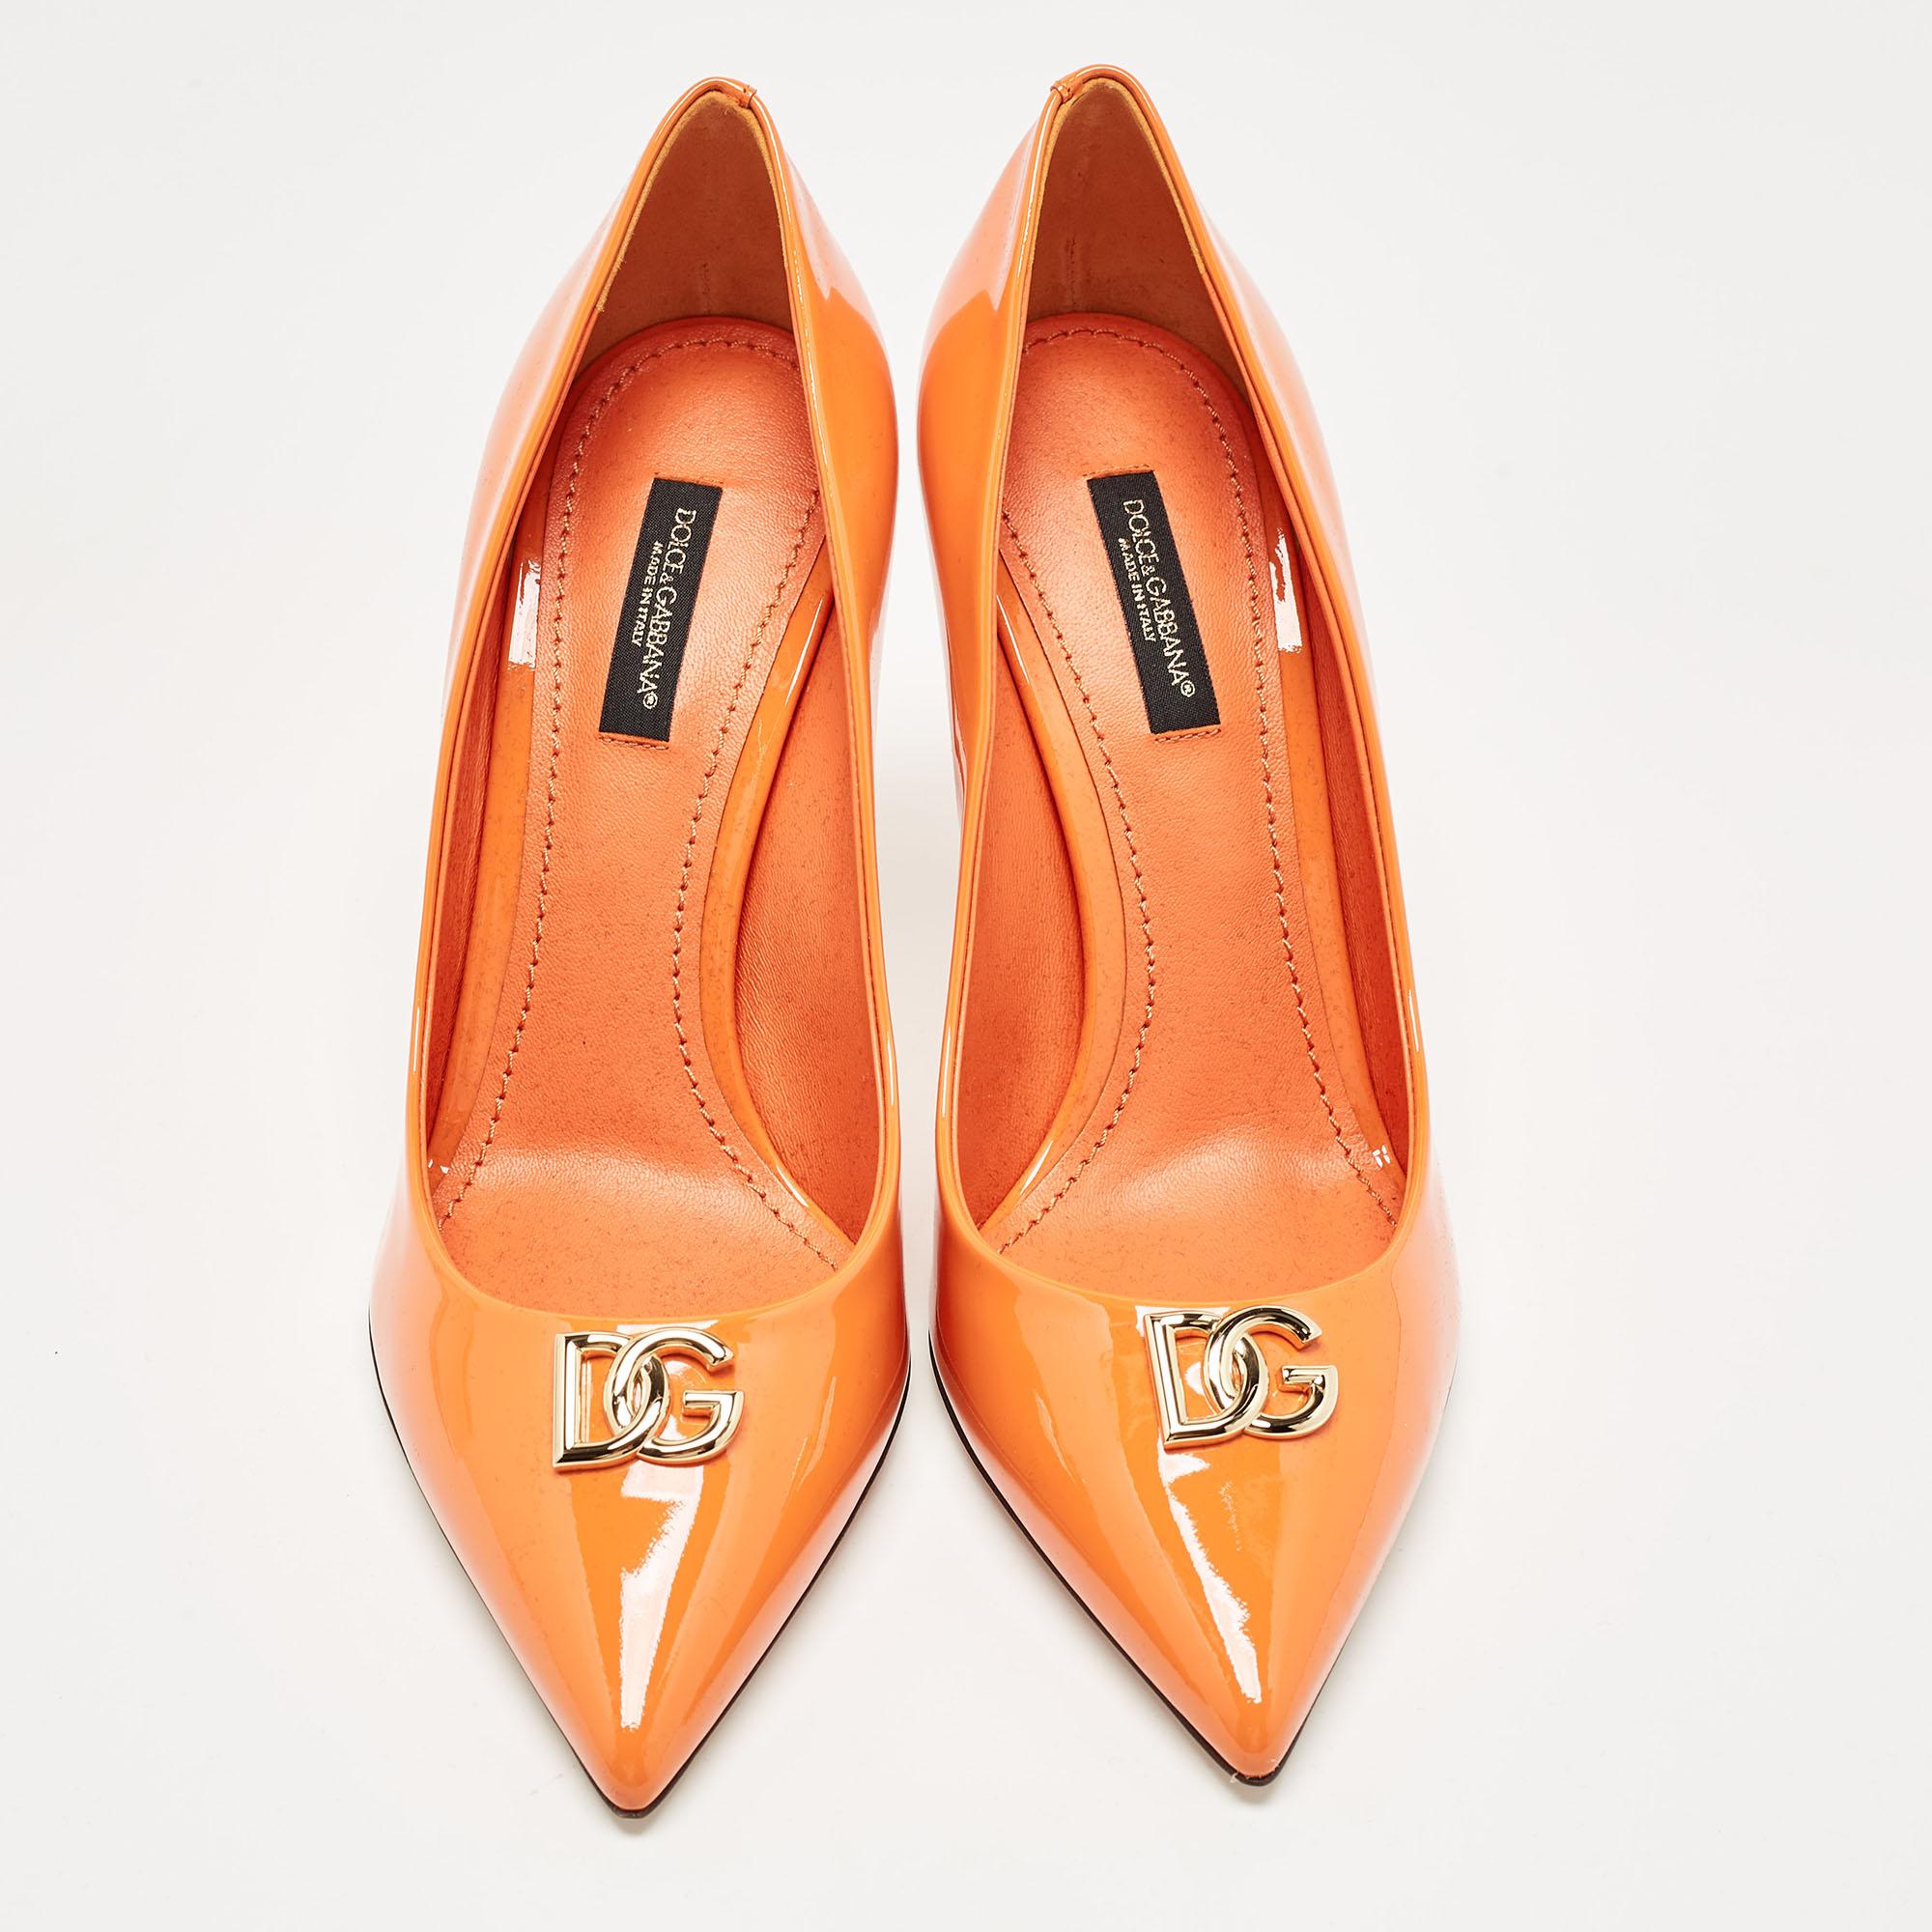 The fashion house’s tradition of excellence, coupled with modern design sensibilities, works to make these Dolce & Gabbana orange pumps a fabulous choice. They'll help you deliver a chic look with ease.

Includes: Original Dustbag

